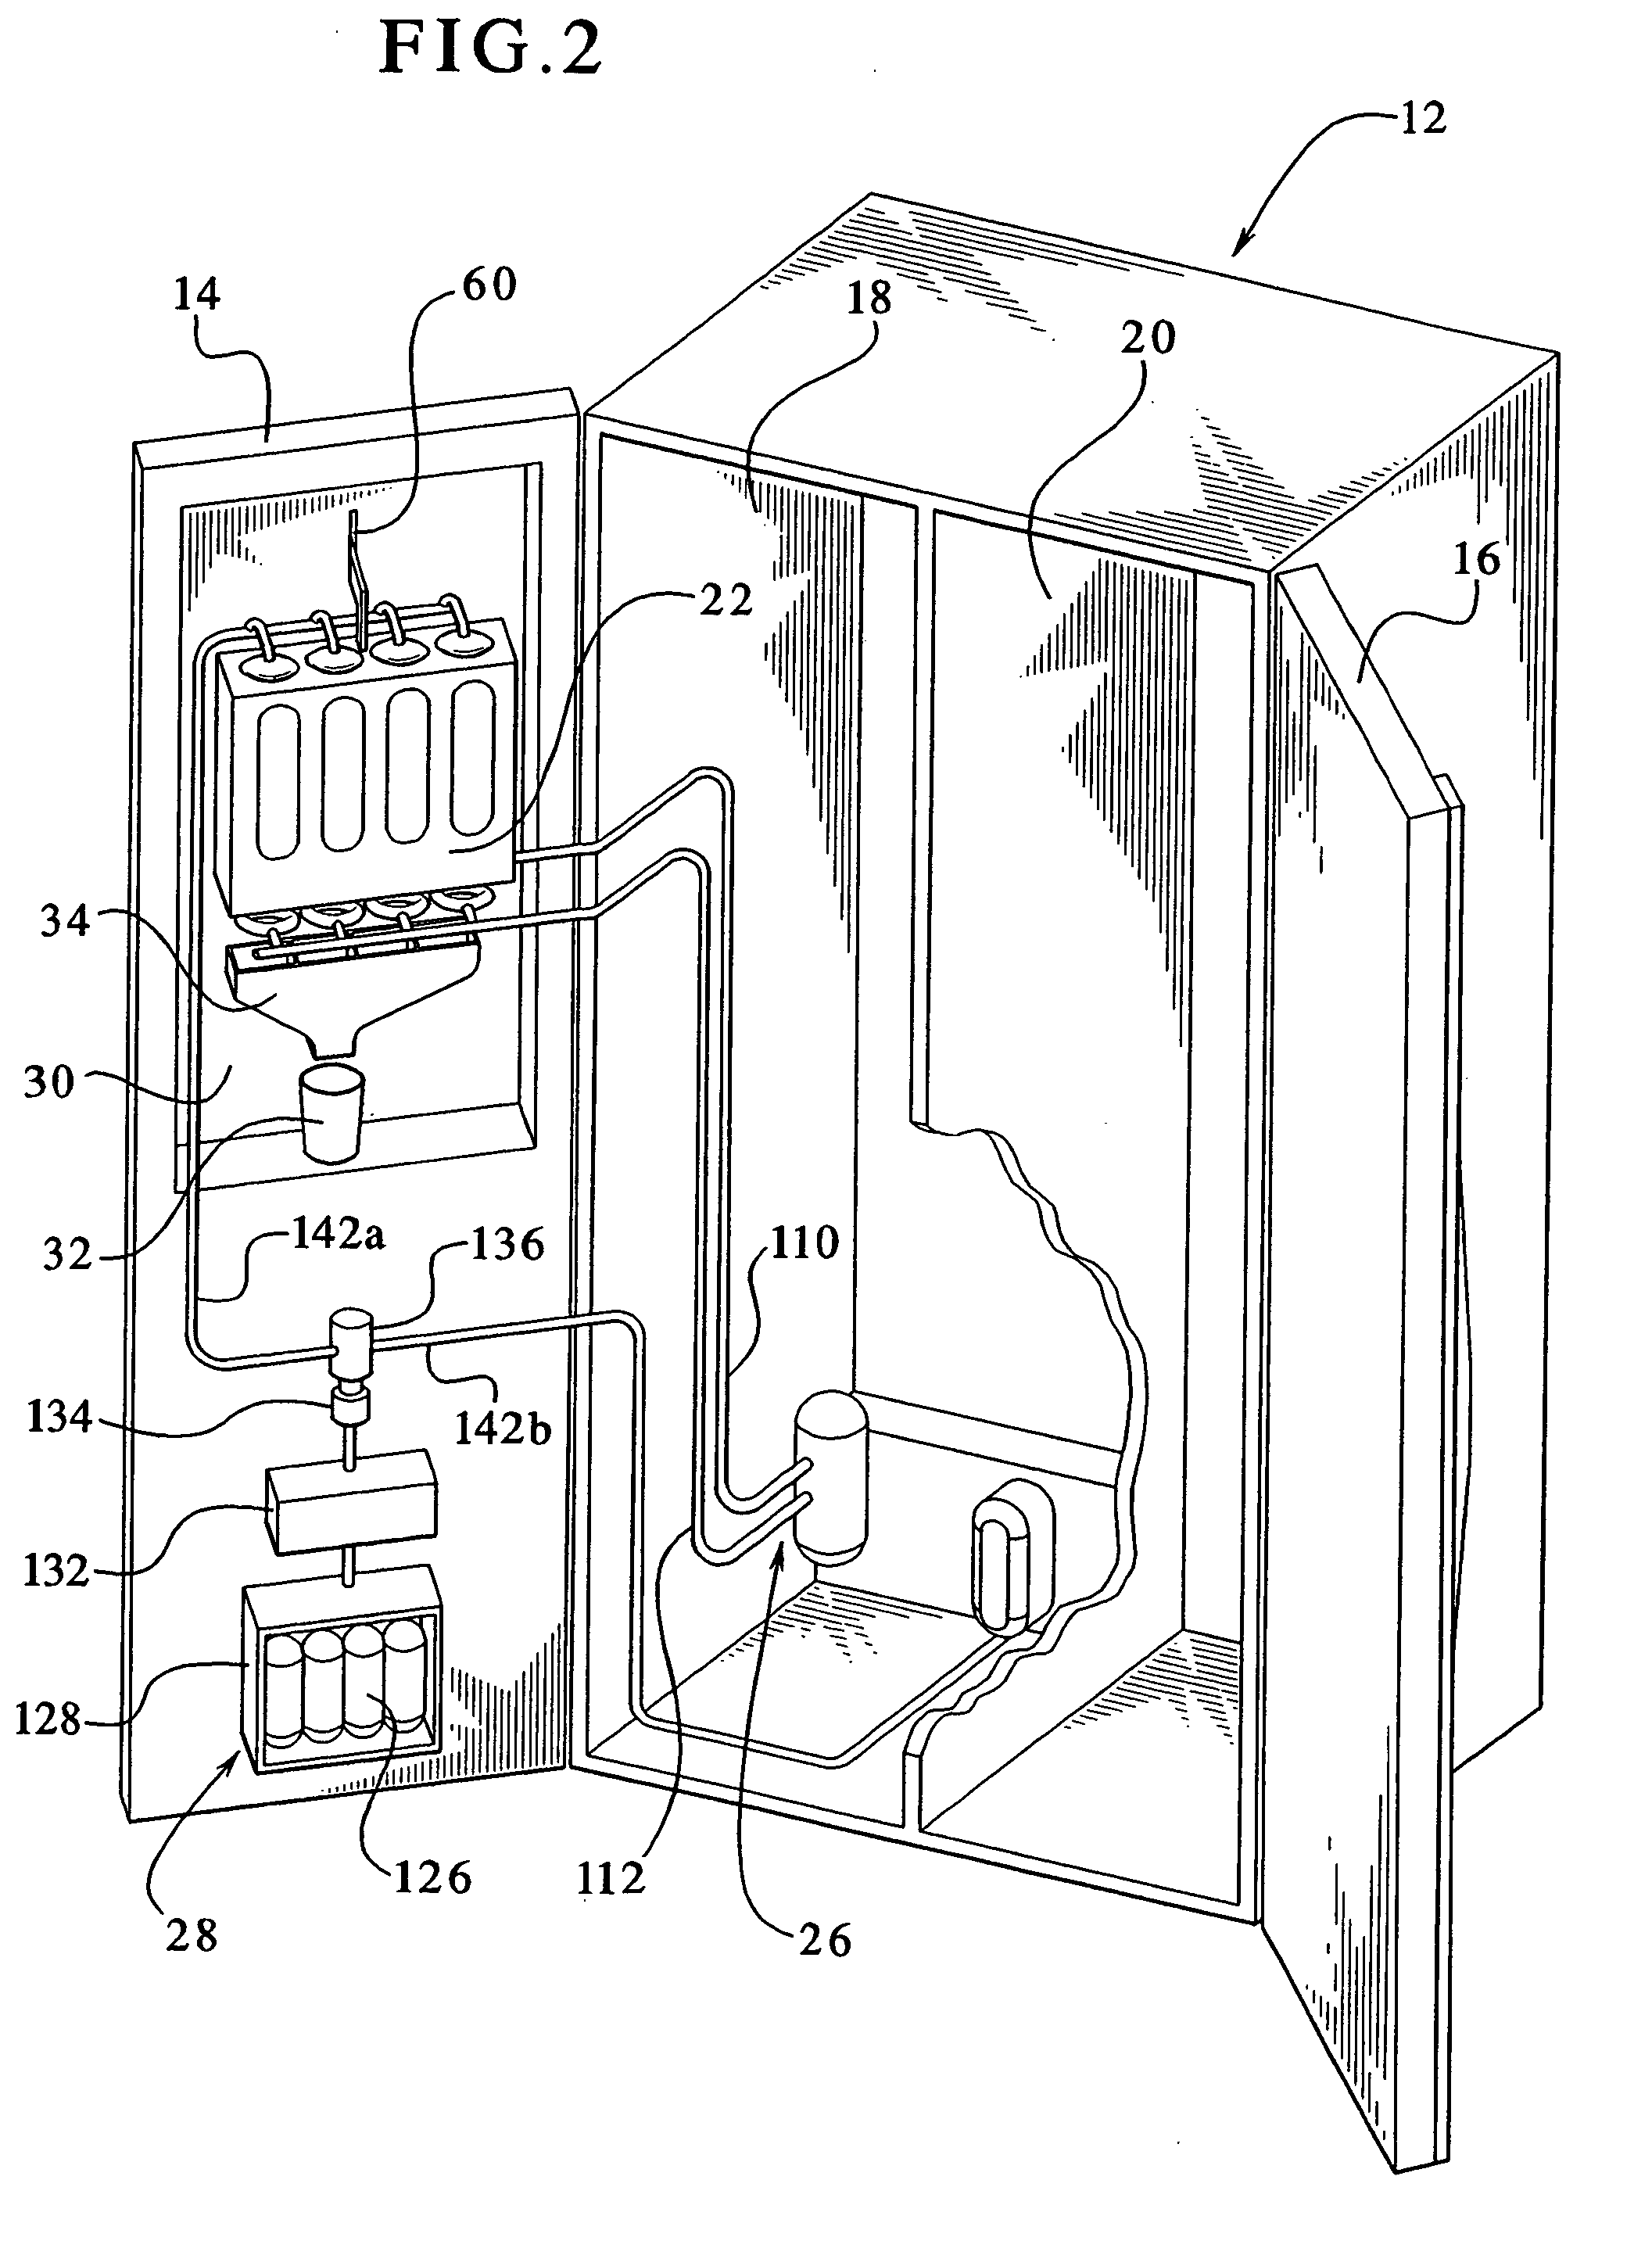 Refrigerator having a beverage dispensing apparatus with a drink supply canister holder